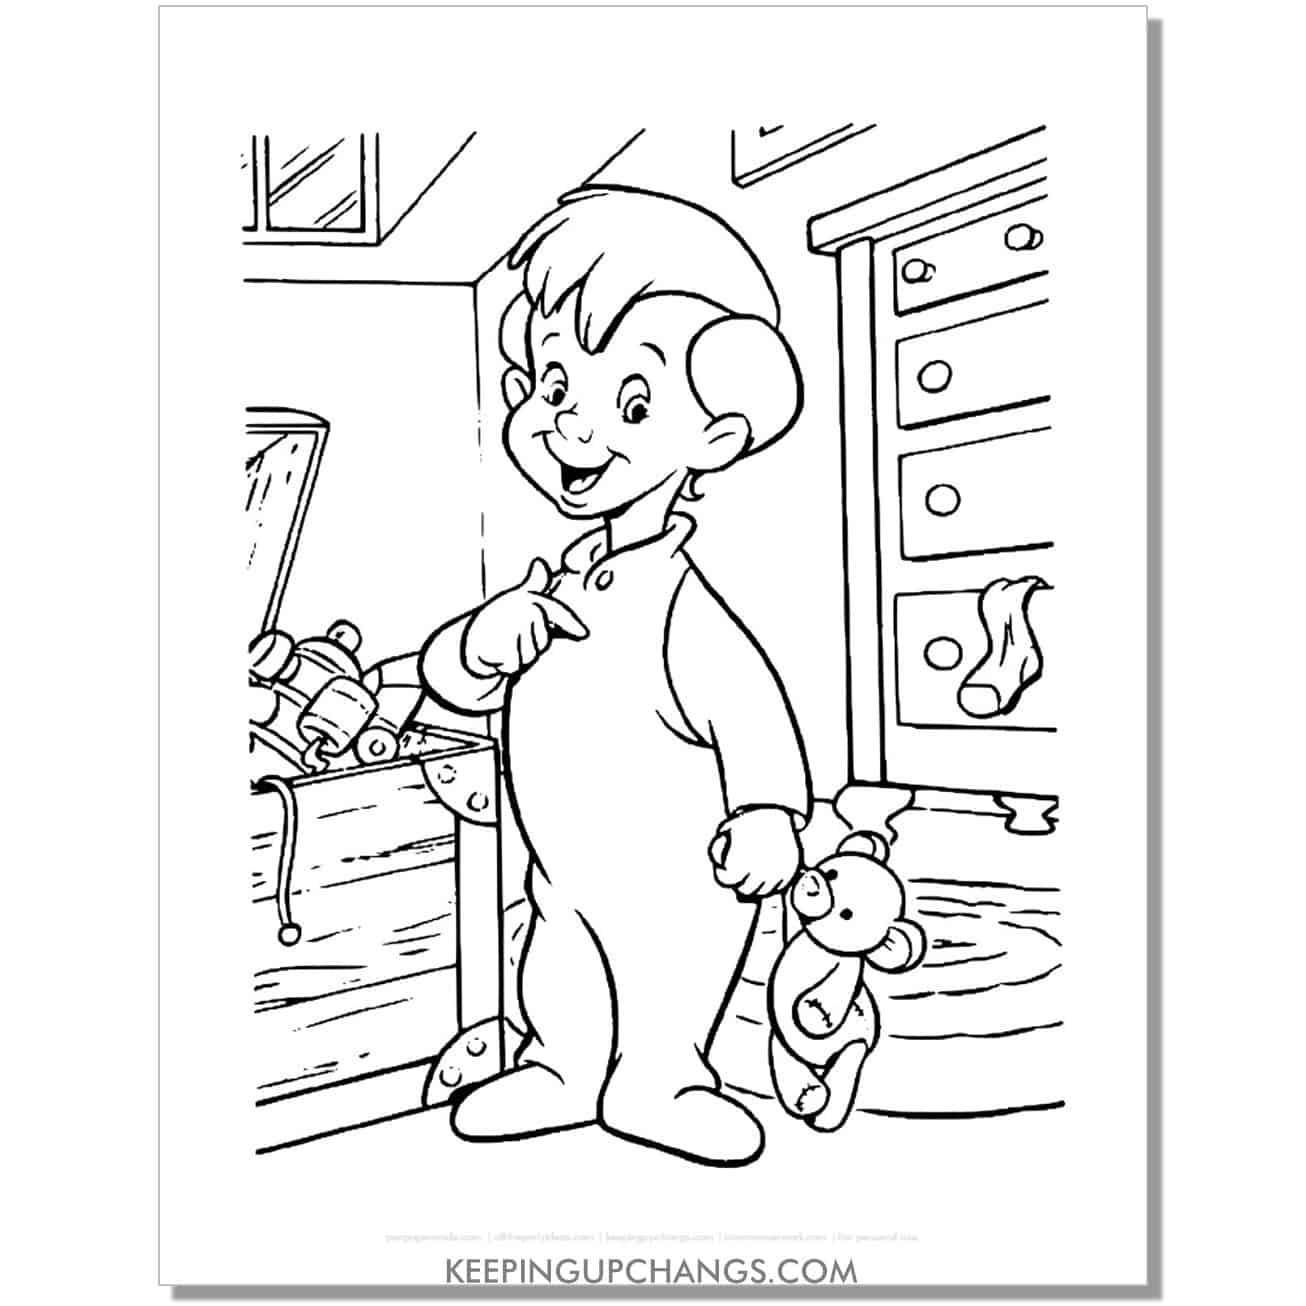 michael darling holding teddy bear coloring page, sheet.